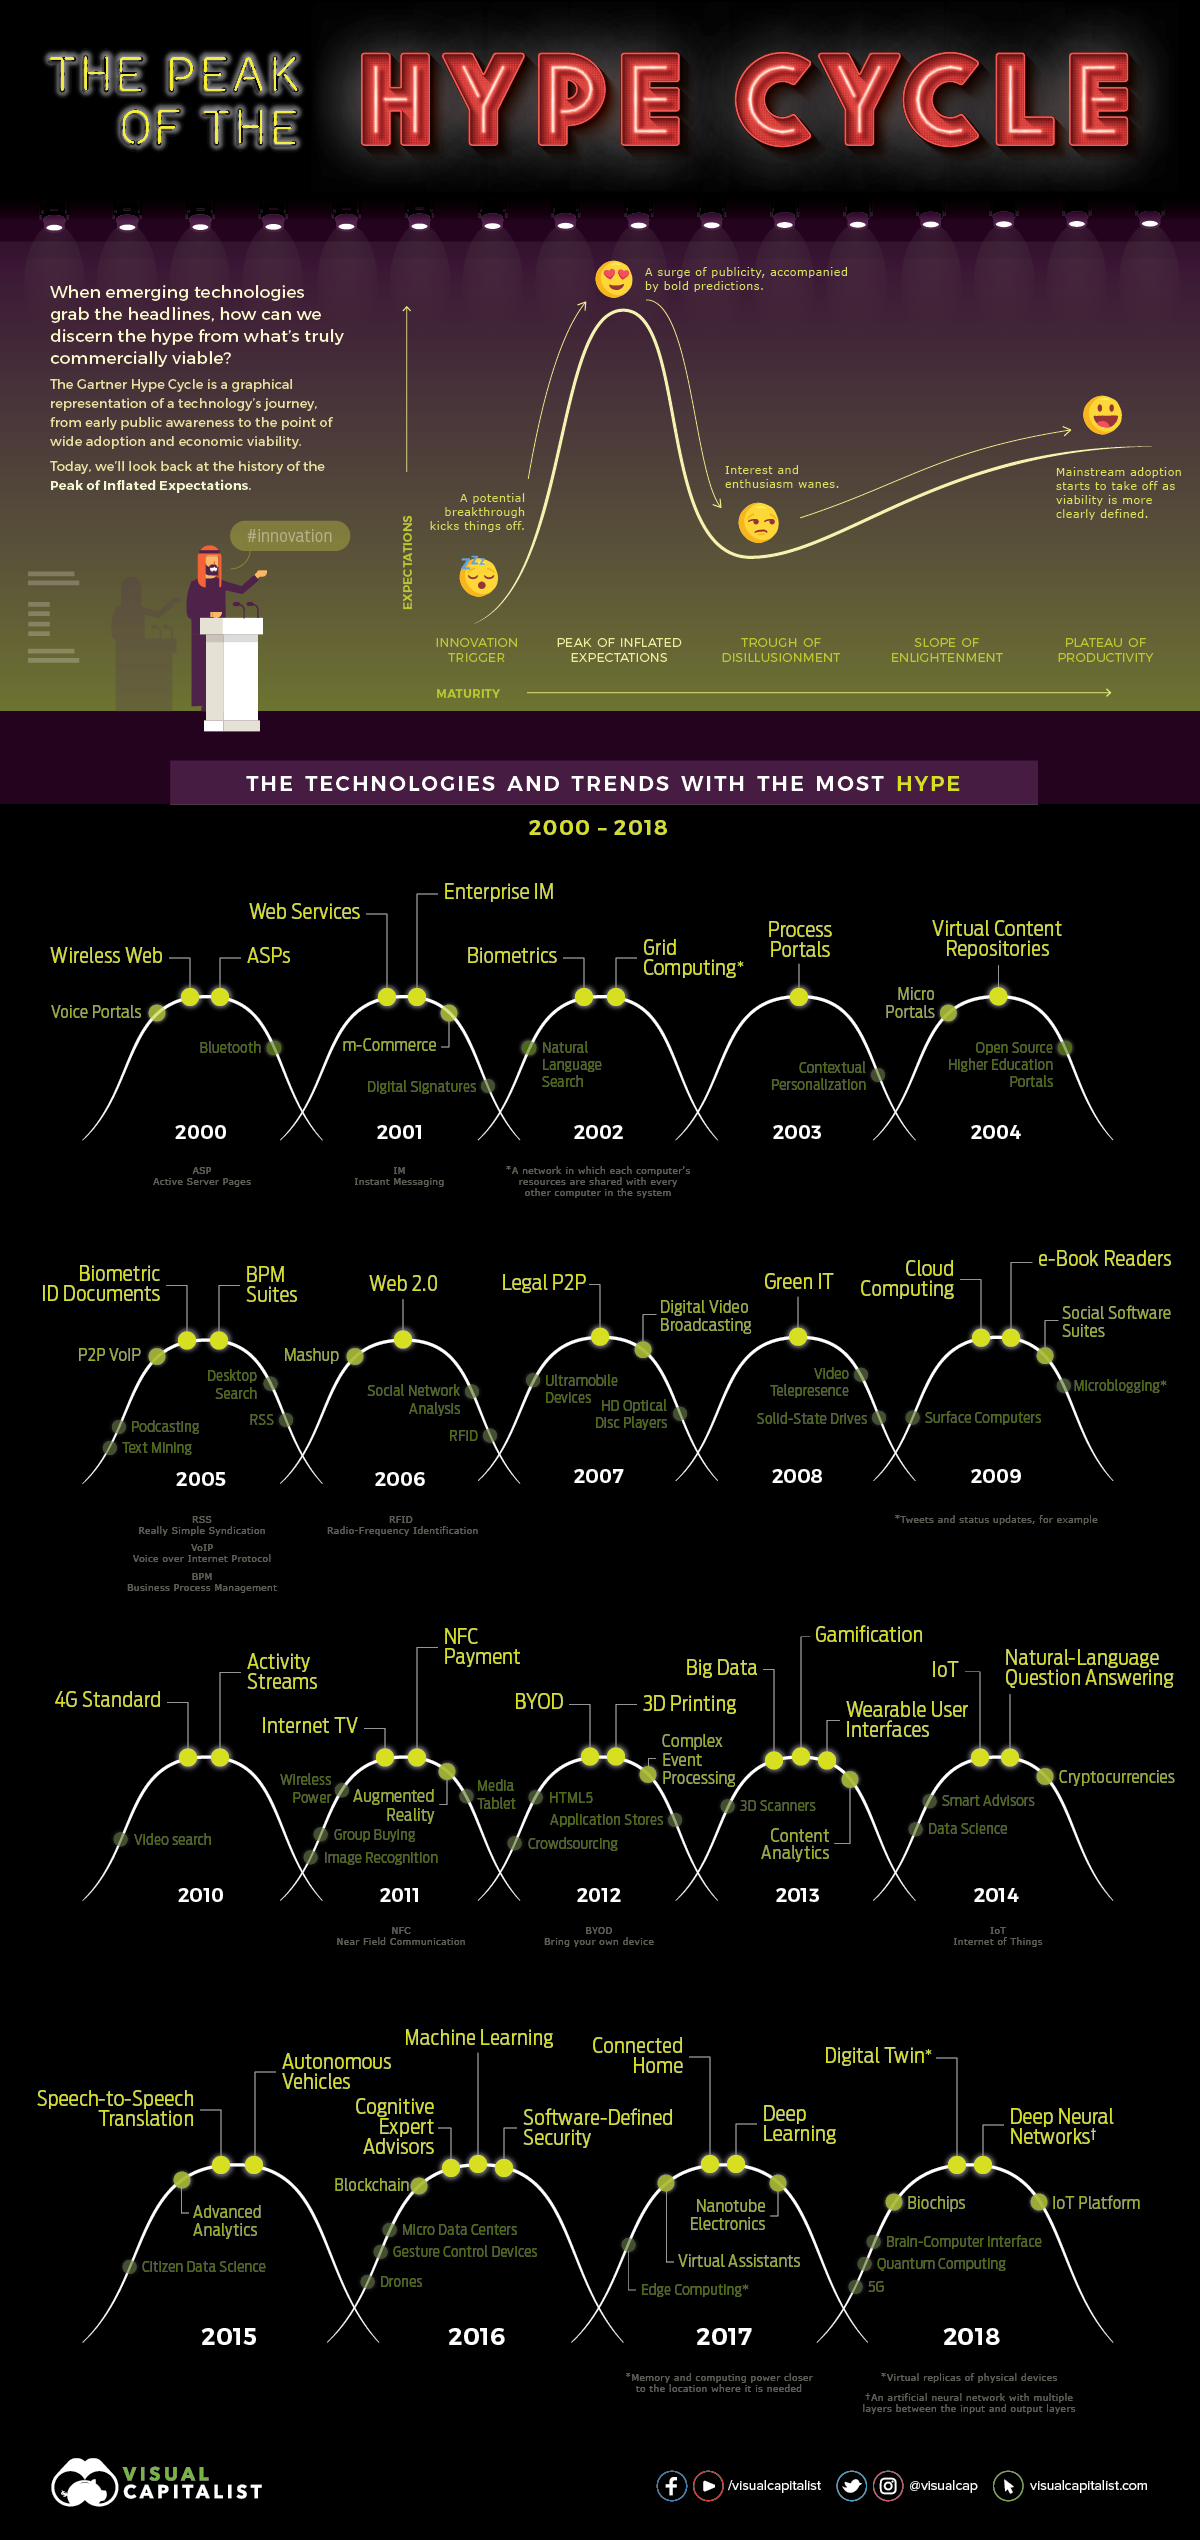 20 years of technology hype cycles